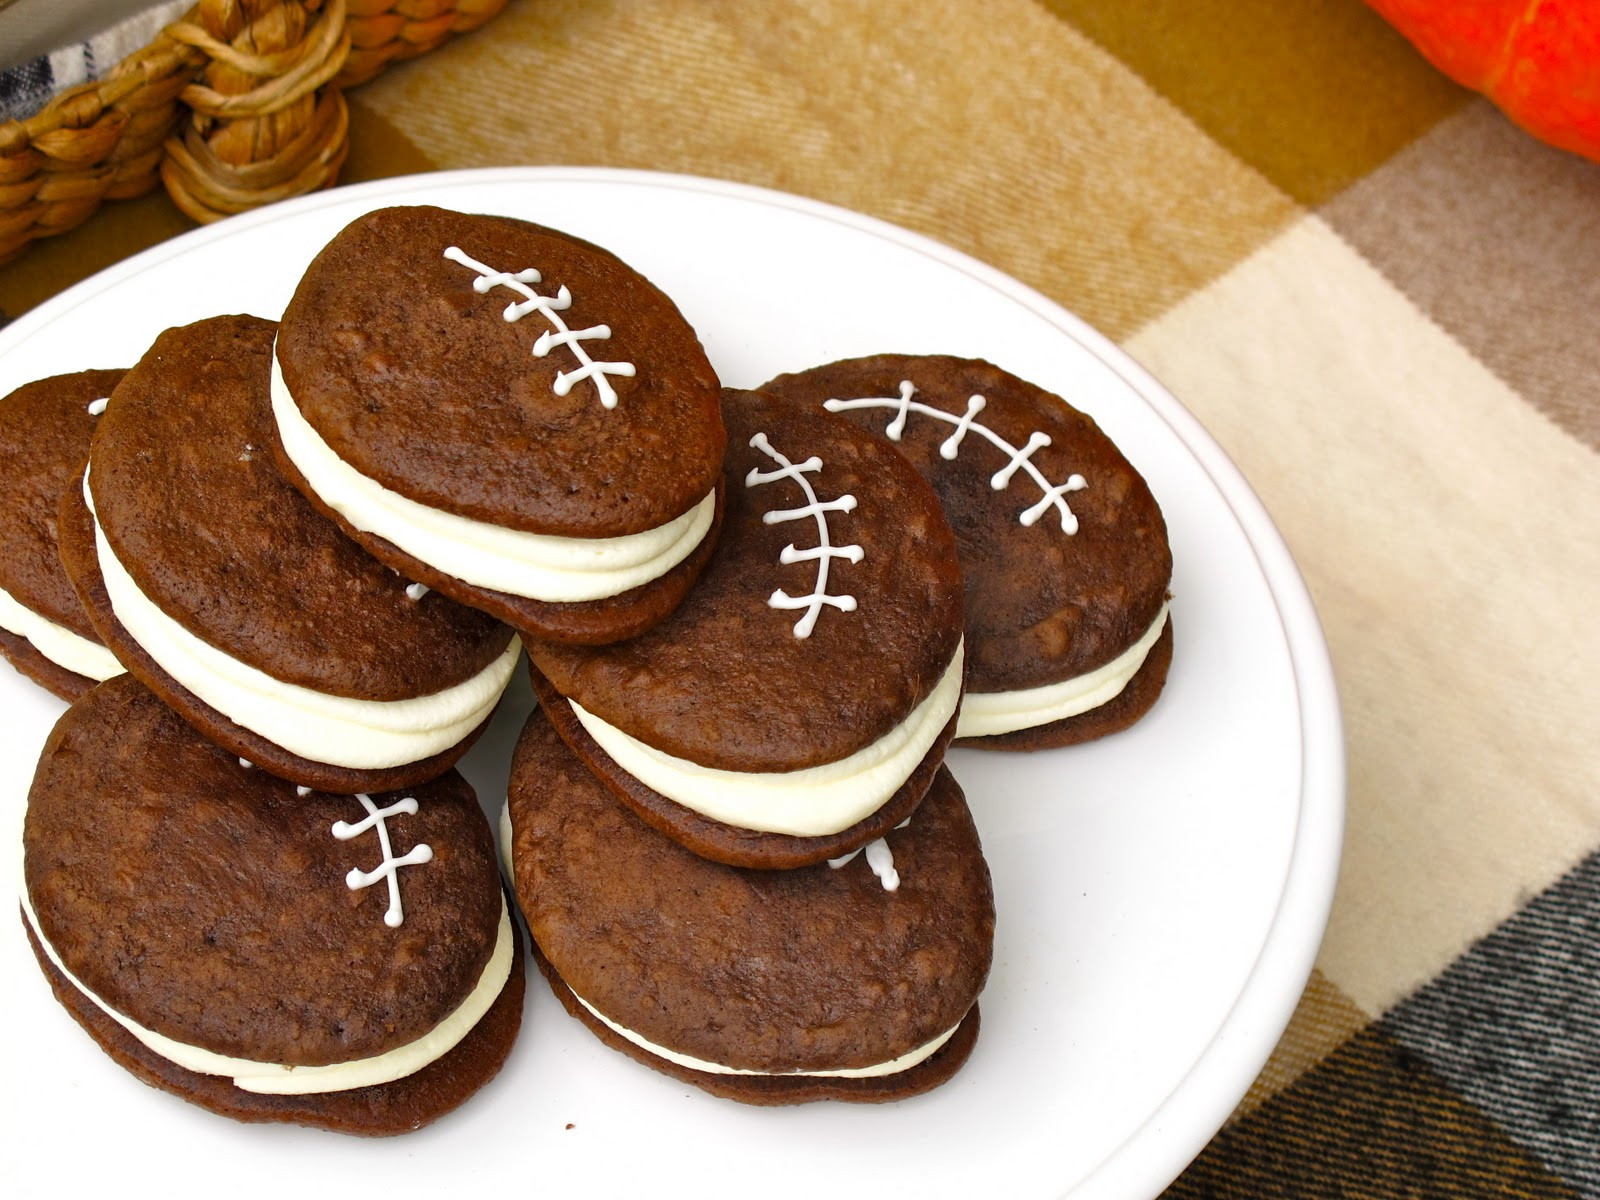 Football Party Desserts
 Jenny Steffens Hobick Football Watch Party Menu for "The